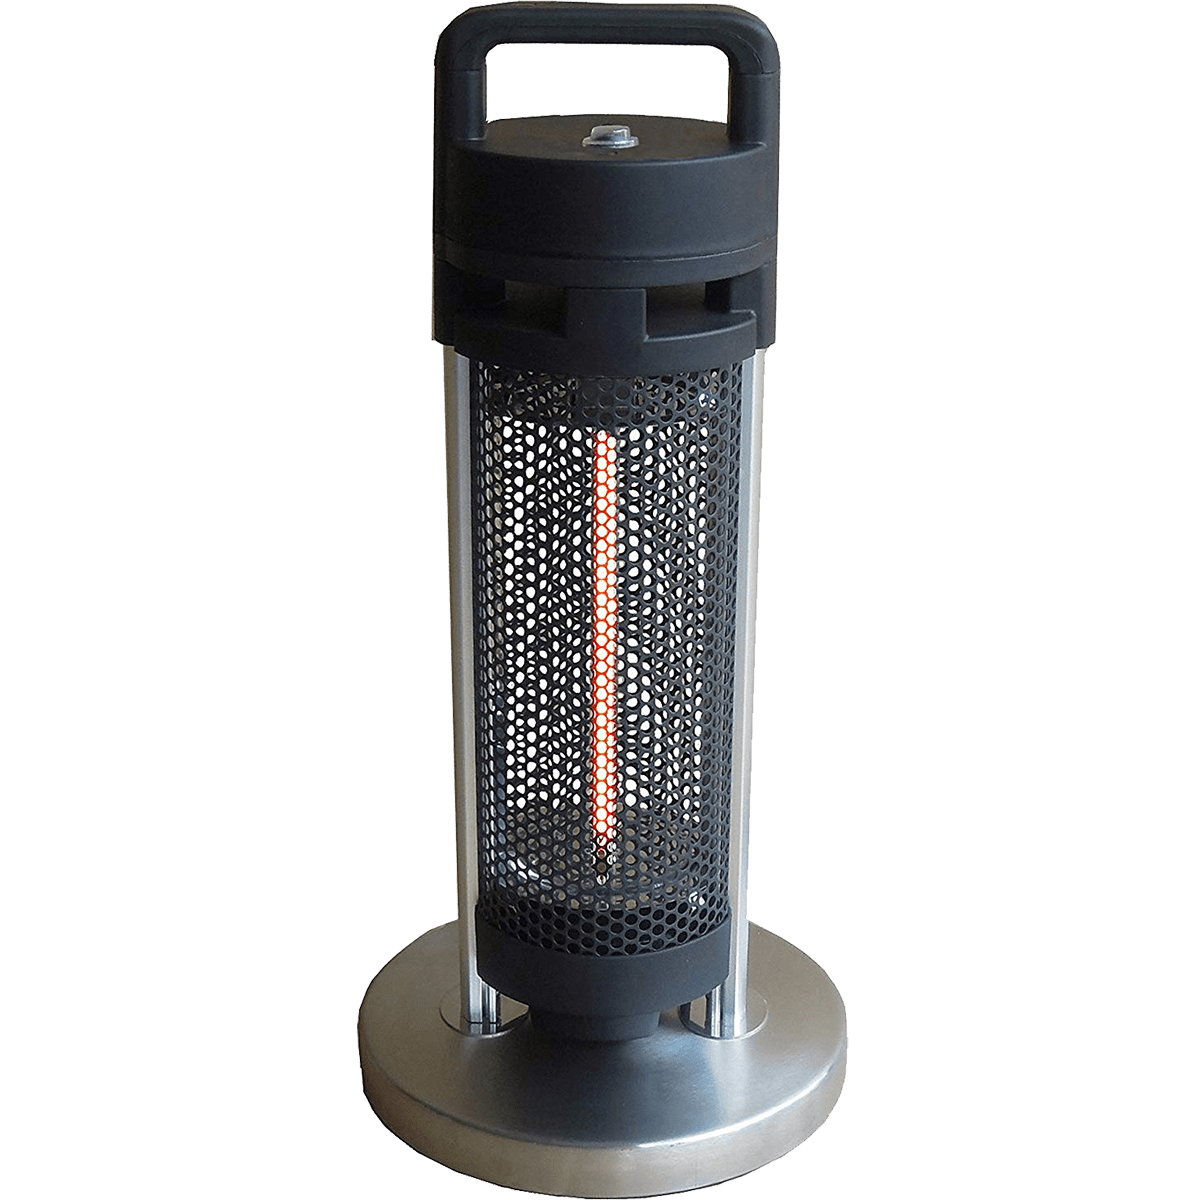 Warm Yourself With Portable Gas Heaters!